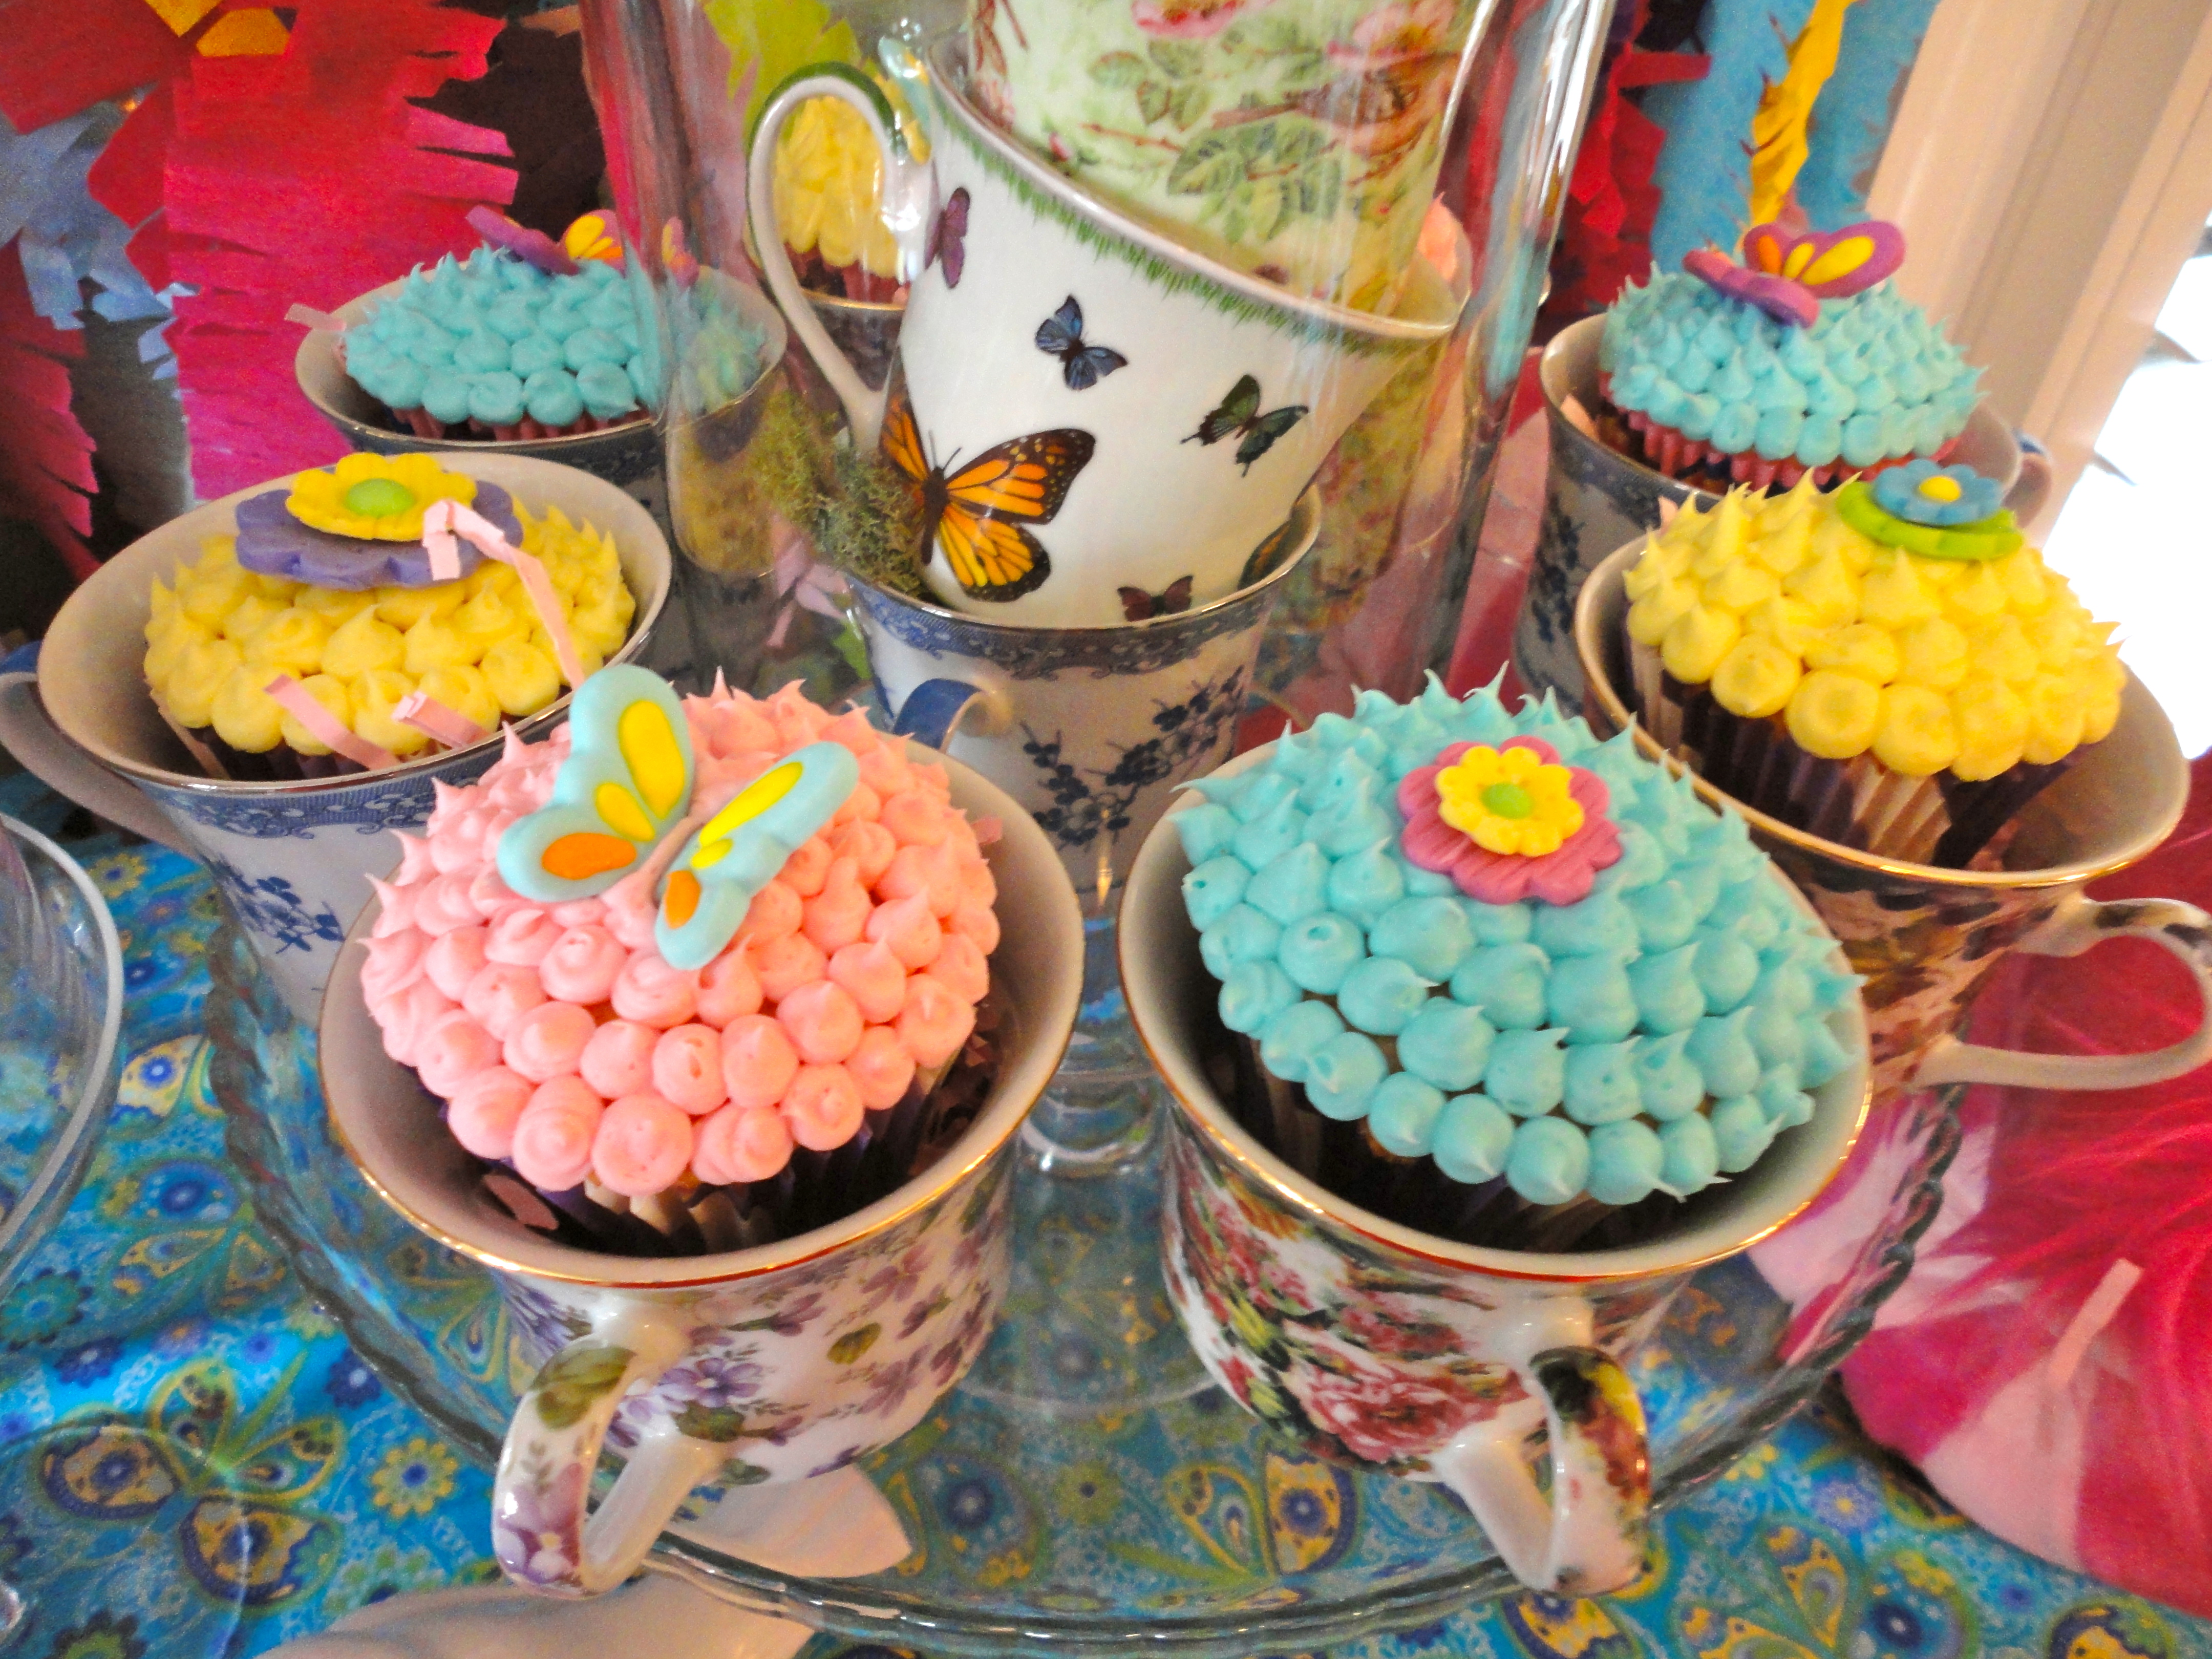 Alice in Wonderland Party Cupcakes in Teacups